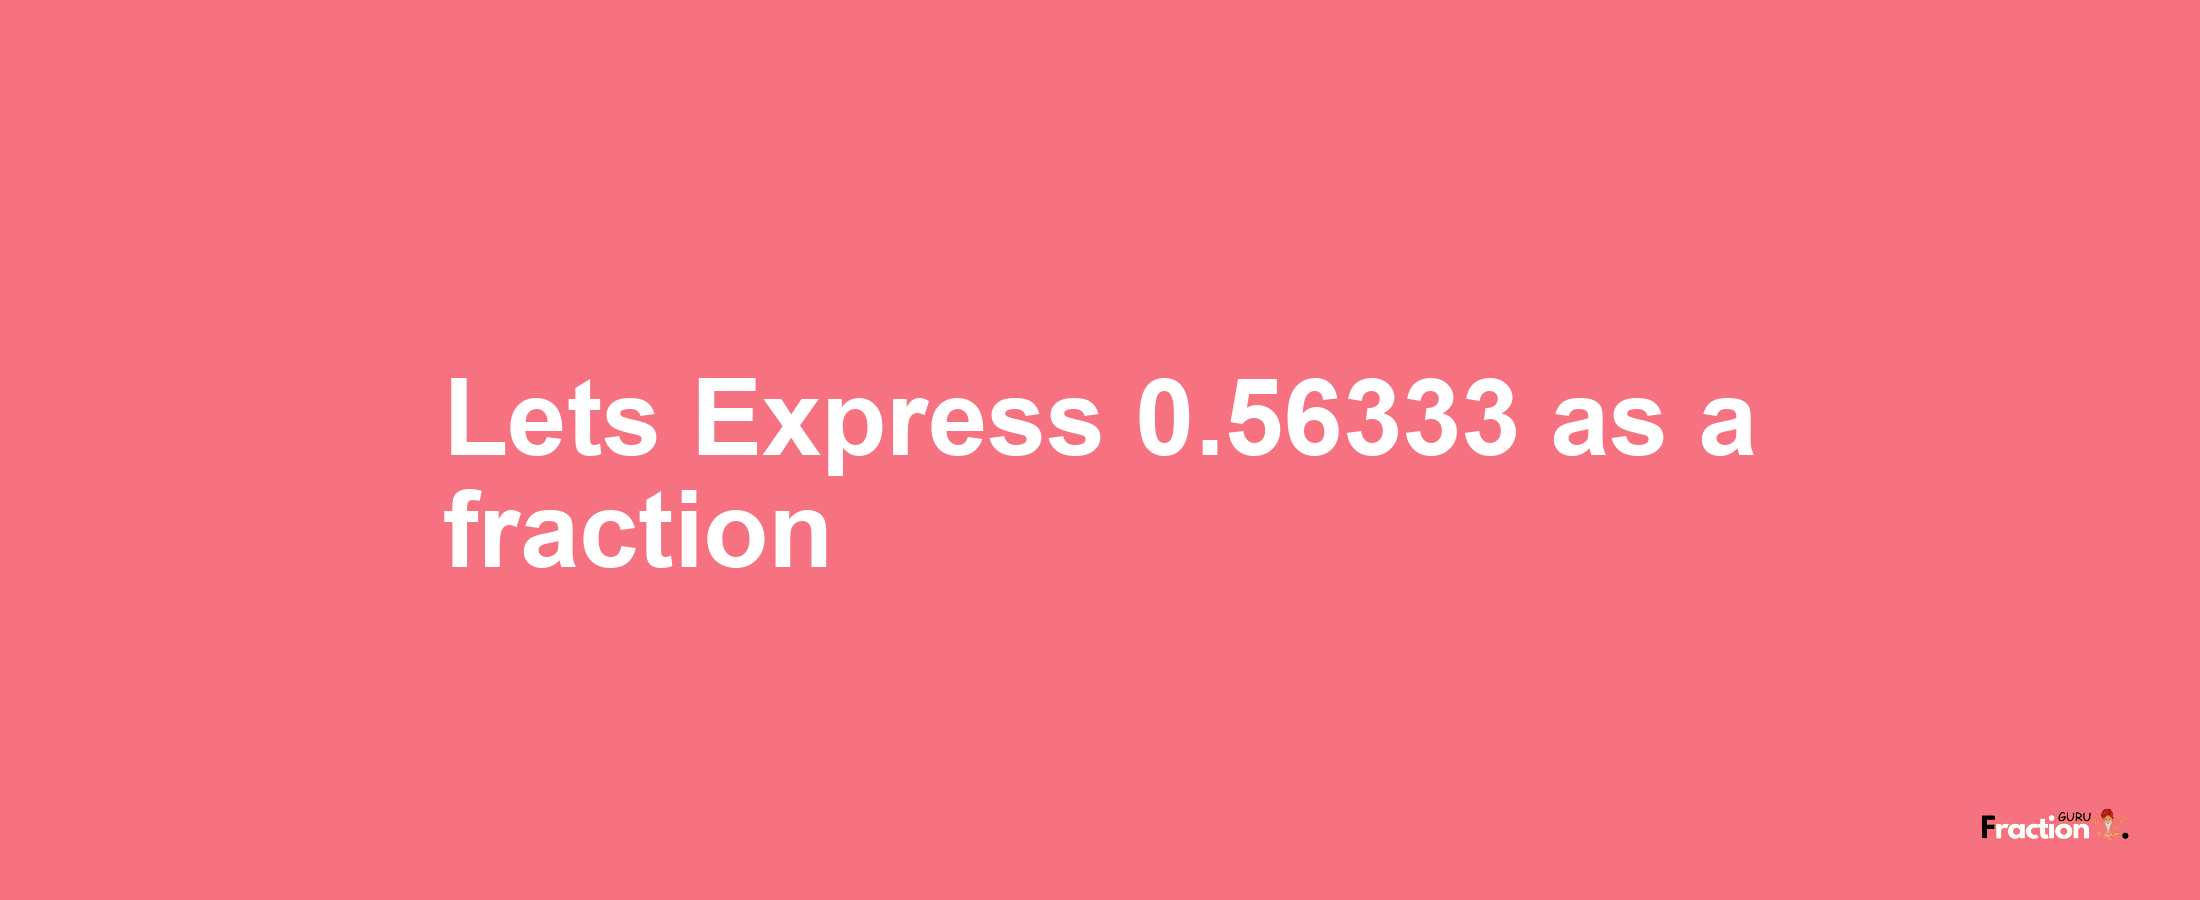 Lets Express 0.56333 as afraction